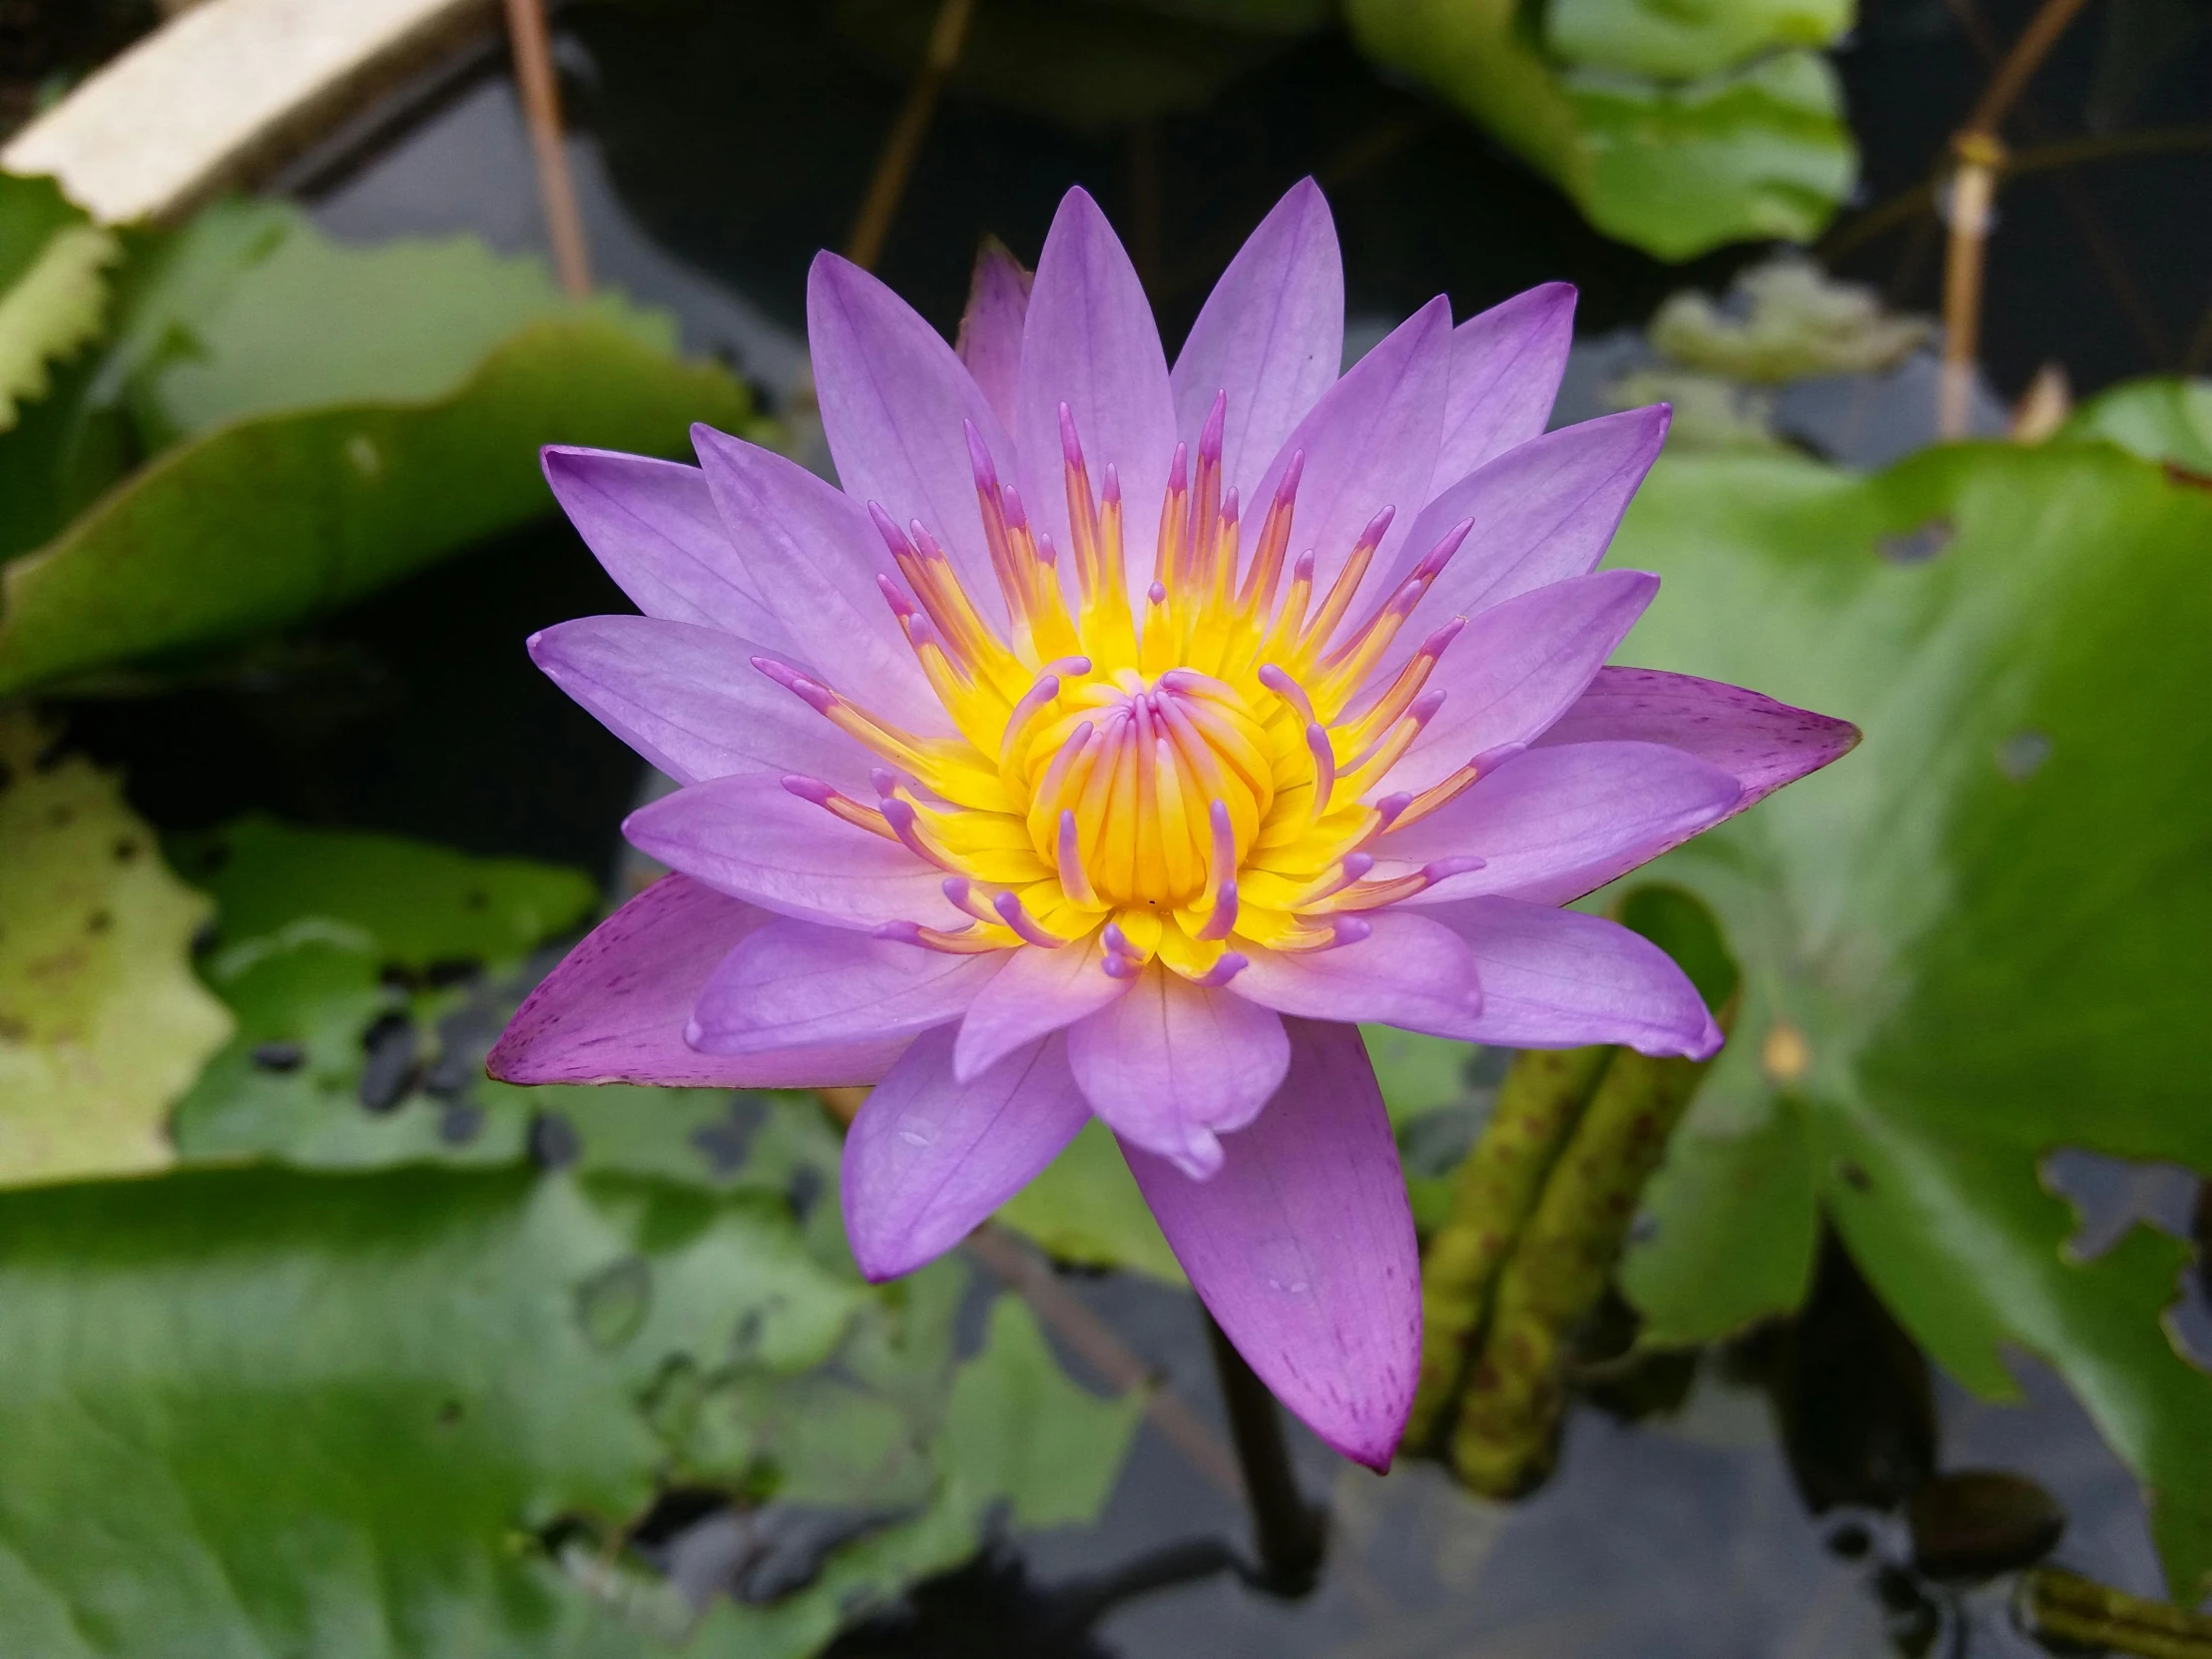 a close up of a purple flower in a pond, puṣkaracūḍa, full front view, purple and yellow, waist high